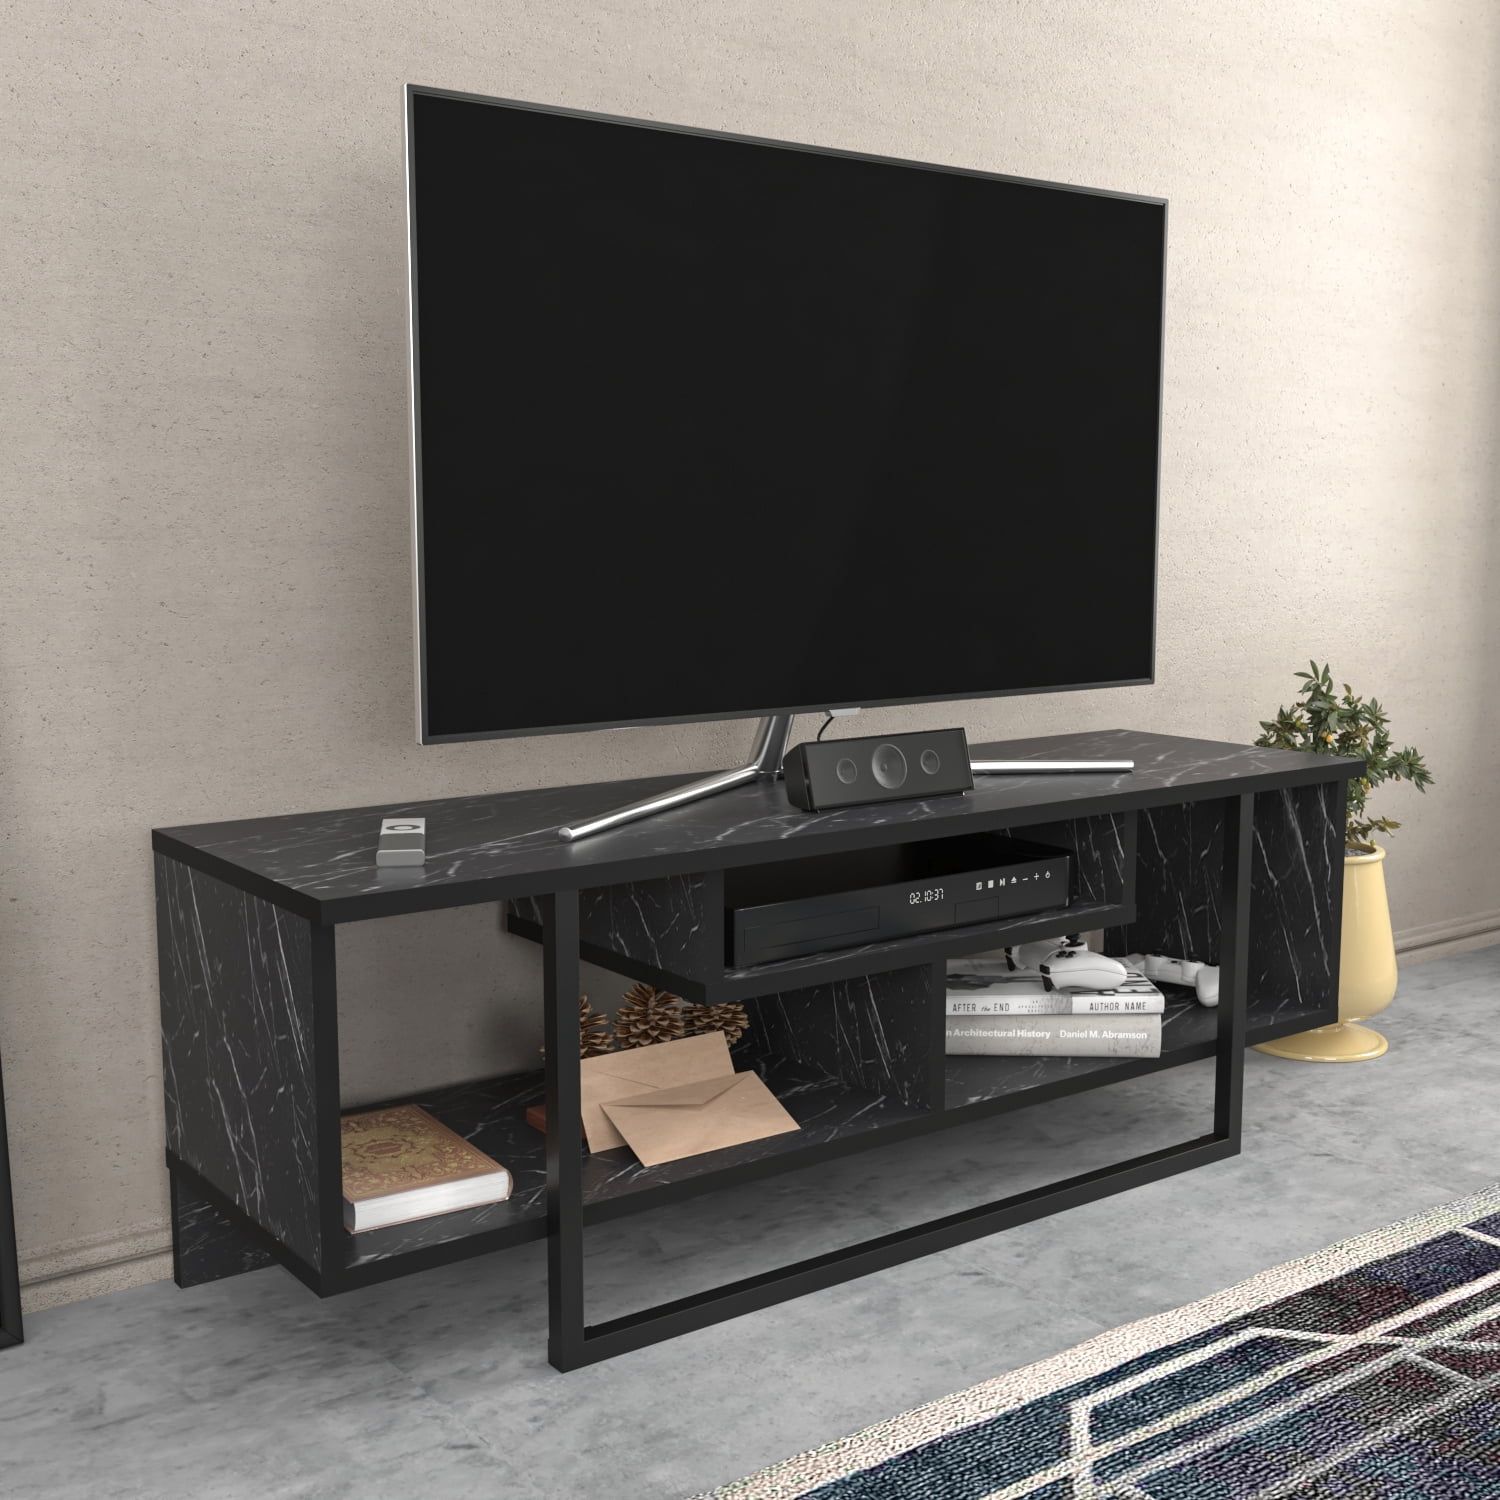 Asal 47" Modern Metal Wood Tv Stand For 55 Inch Tv Marble Black –  Walmart Regarding Black Marble Tv Stands (View 9 of 15)